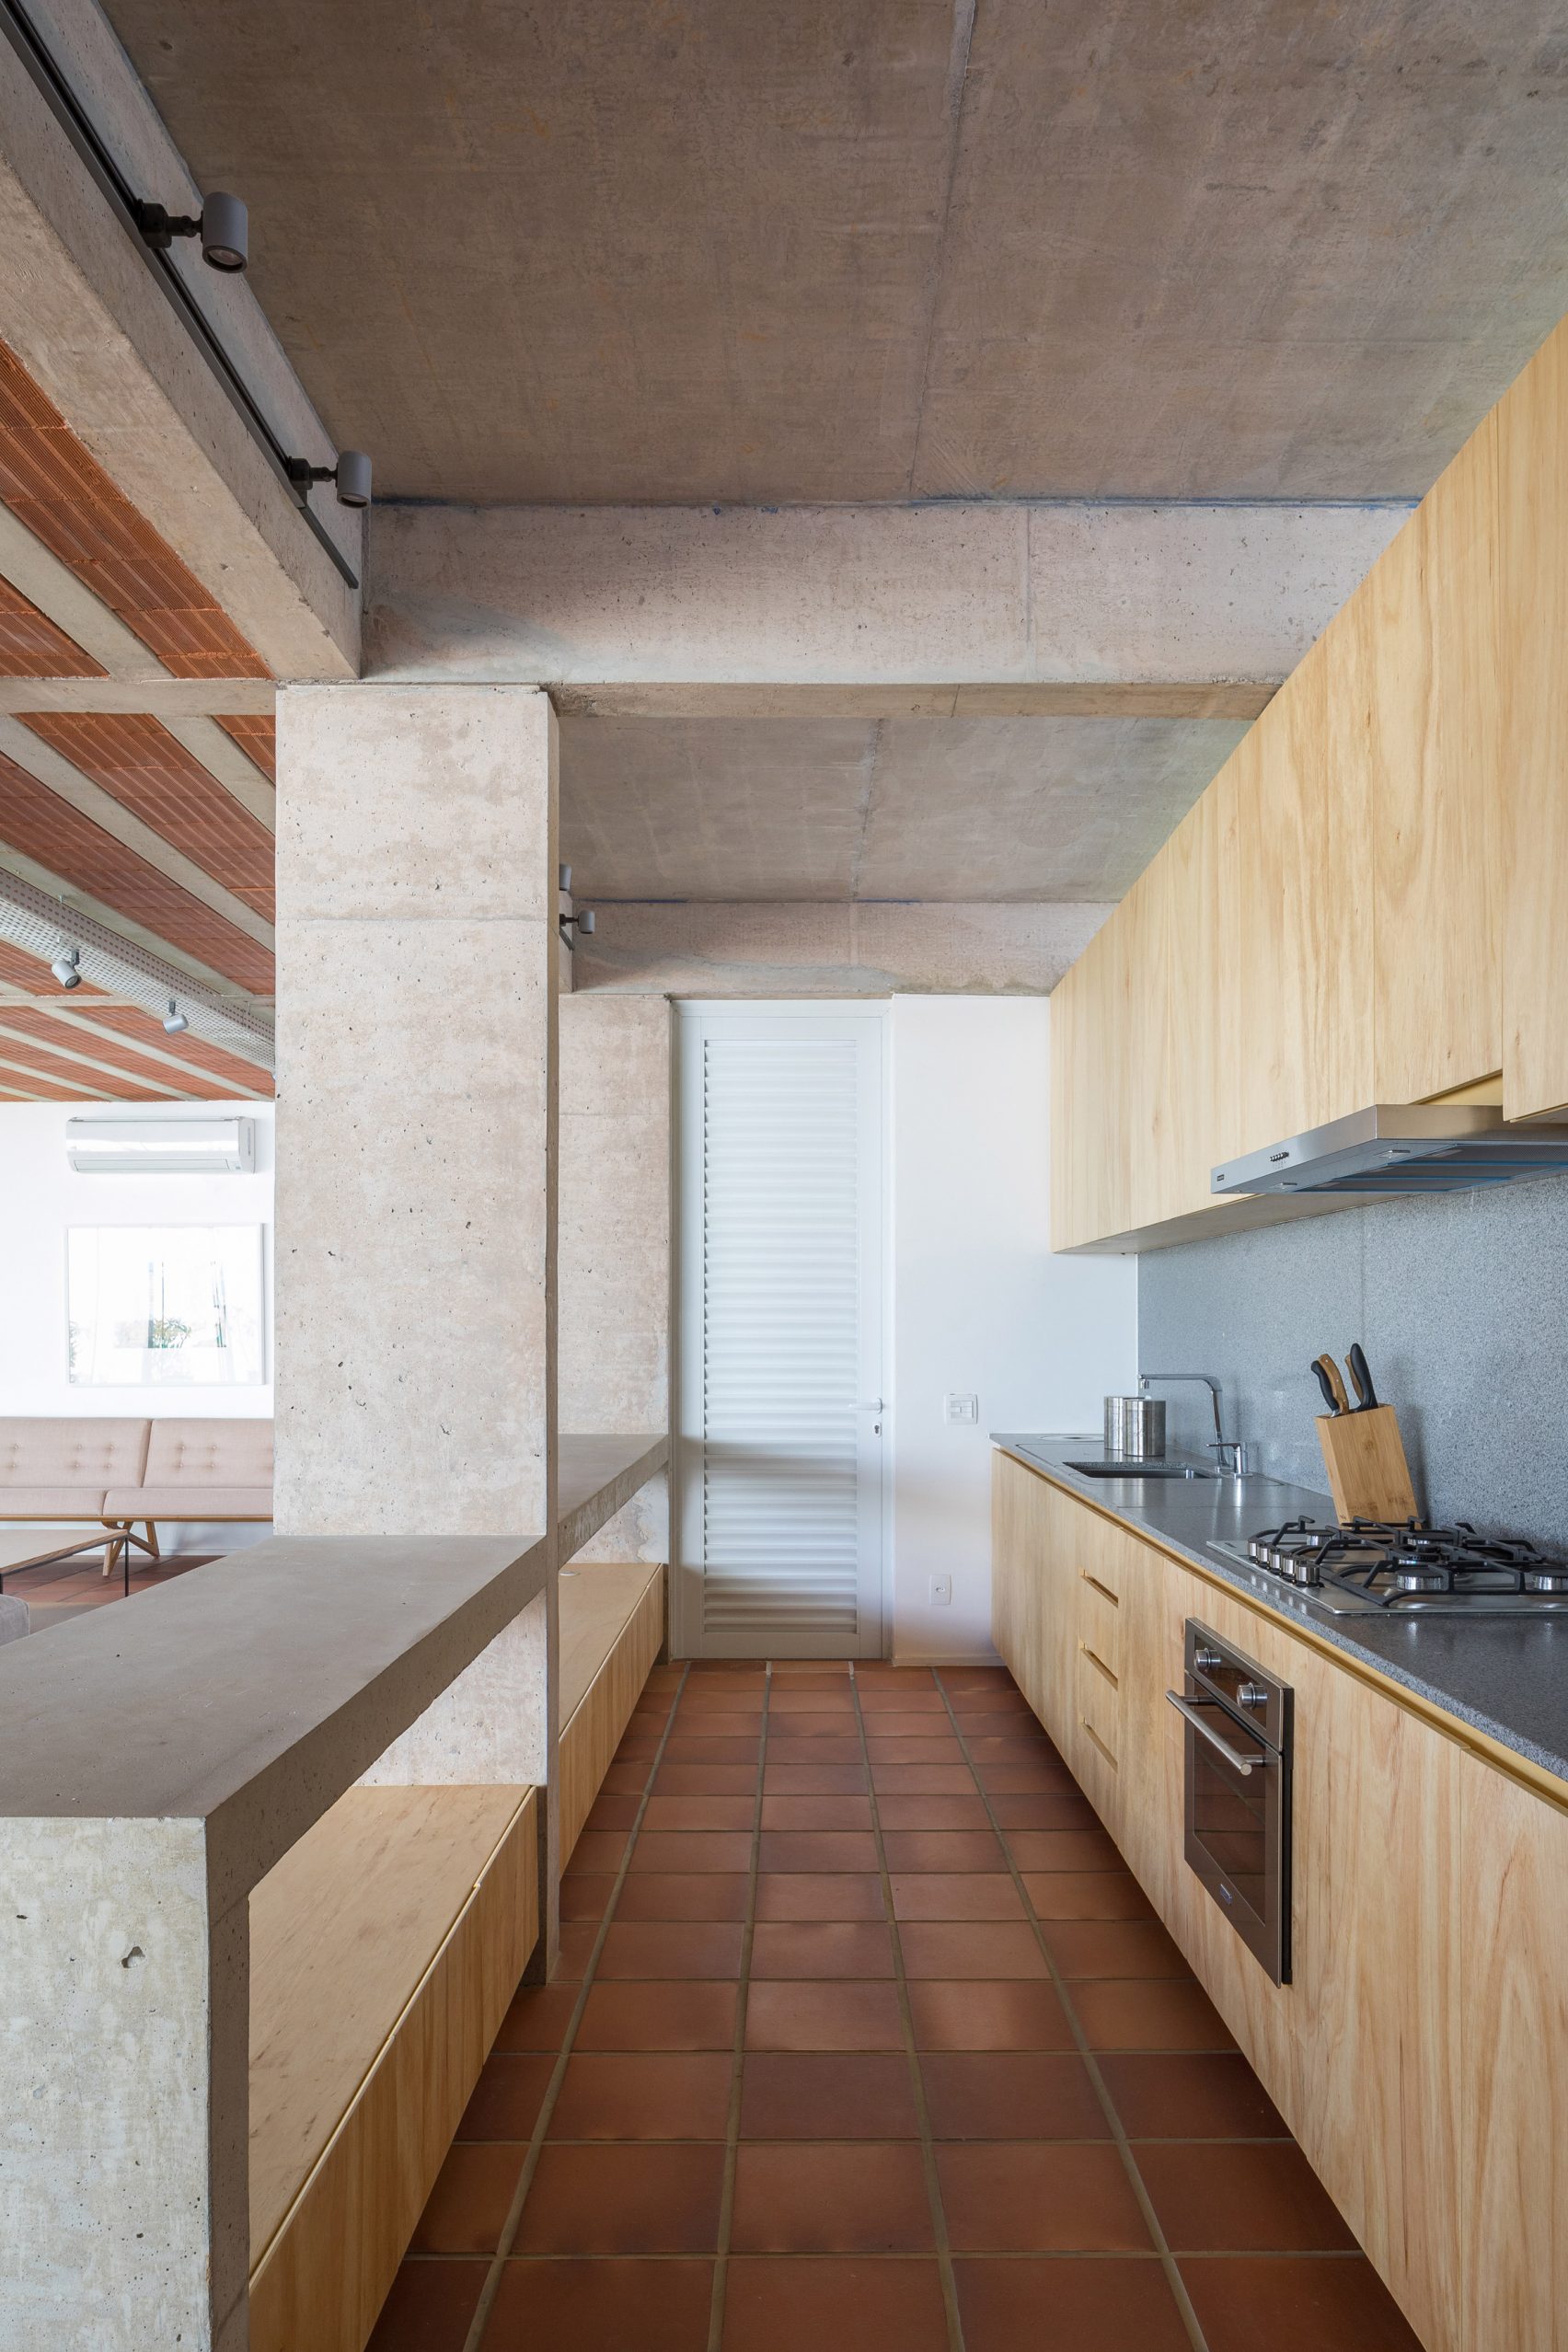 Clay tiles cover the floor of Portico House by Bloco Arquitetos